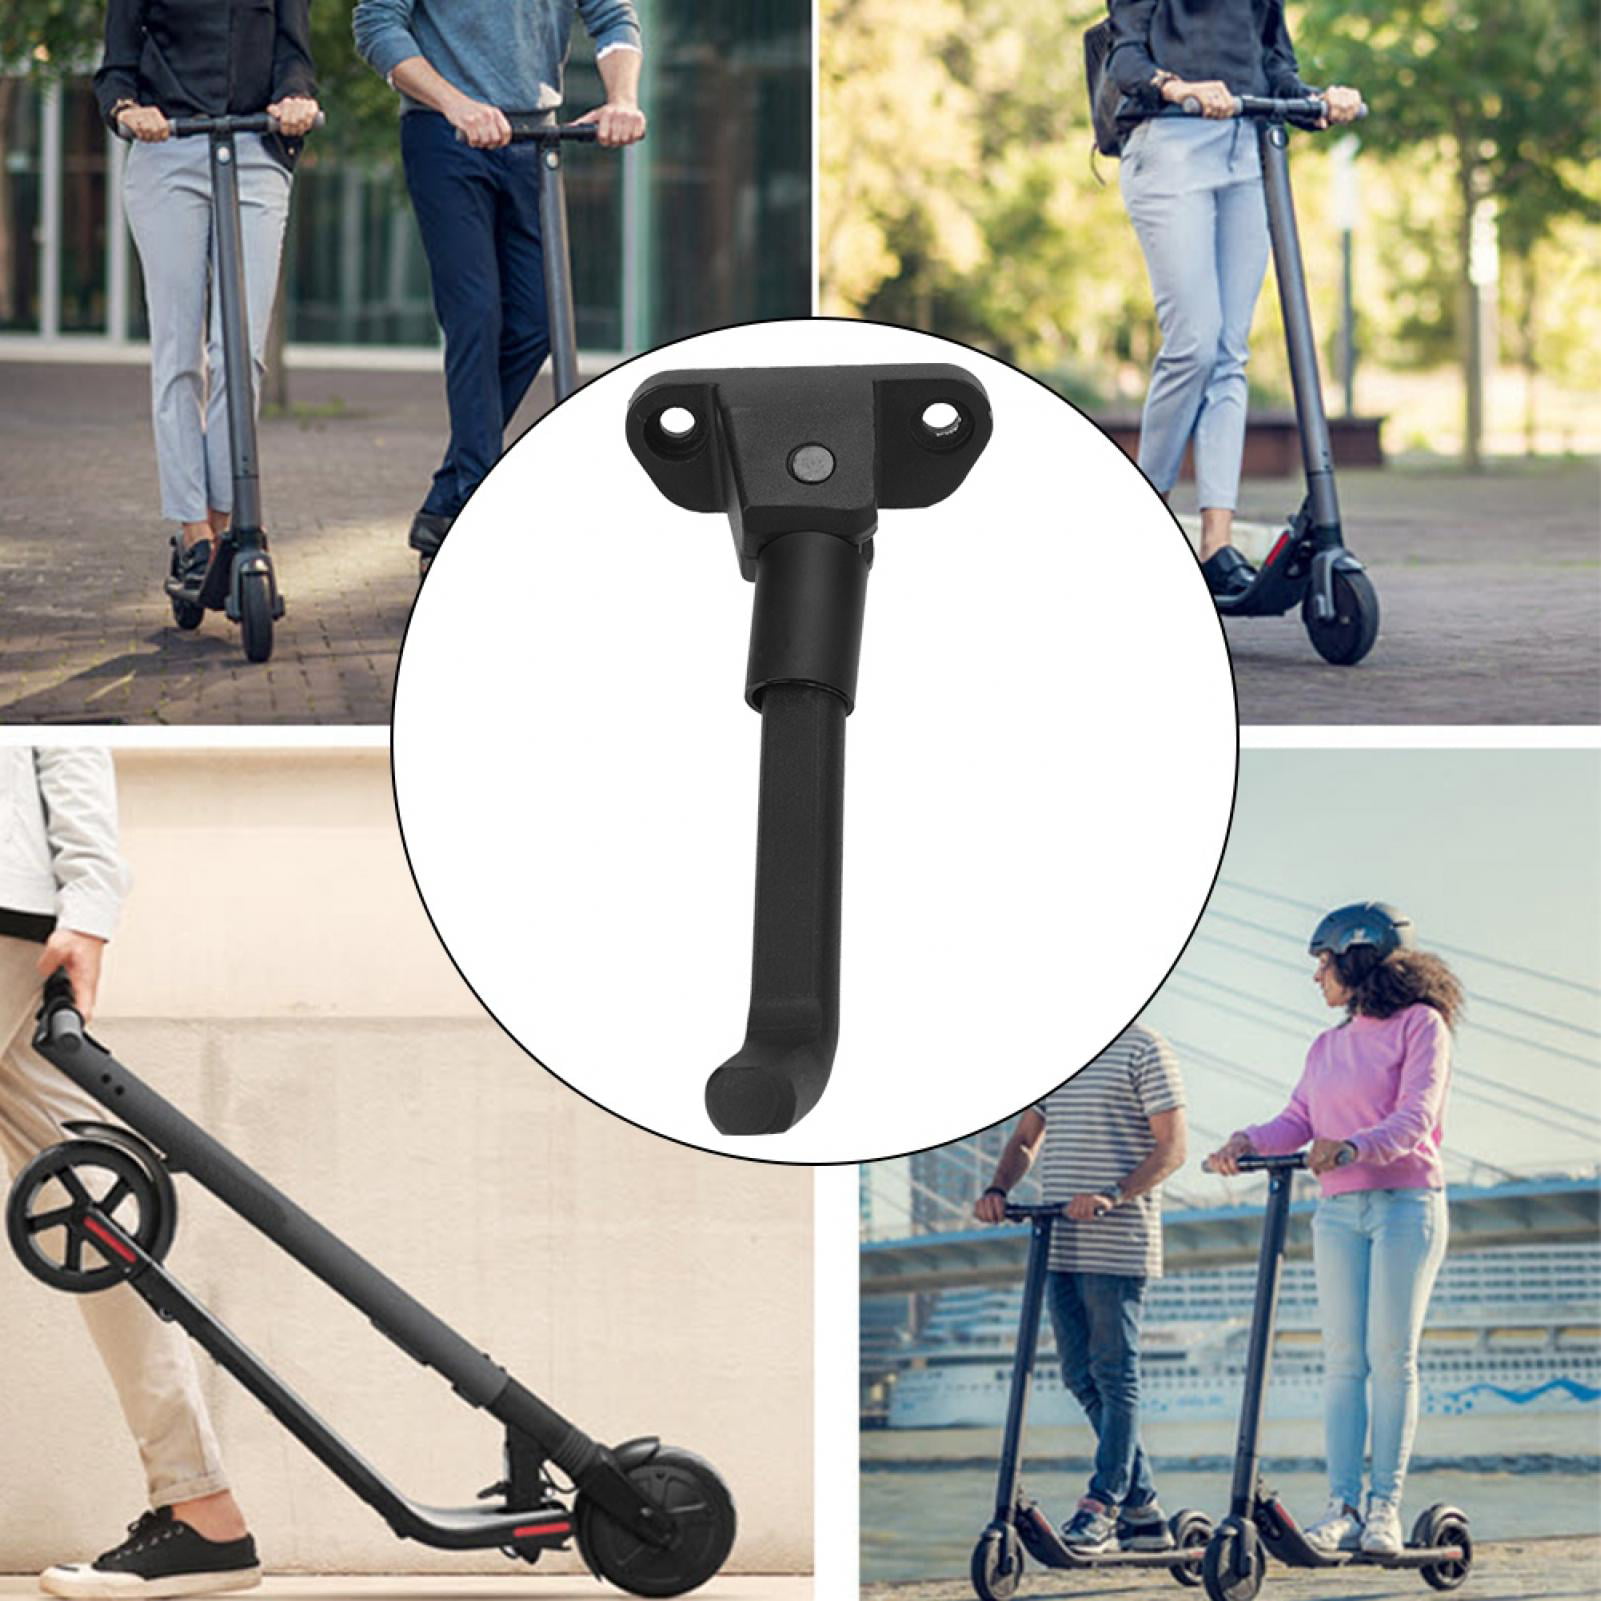 Tbest Scooter Kickstand Aluminum Alloy Electric Scooter Foot Support Bracket Side kickstand Parking Stand for Ninebot MAX‑G30